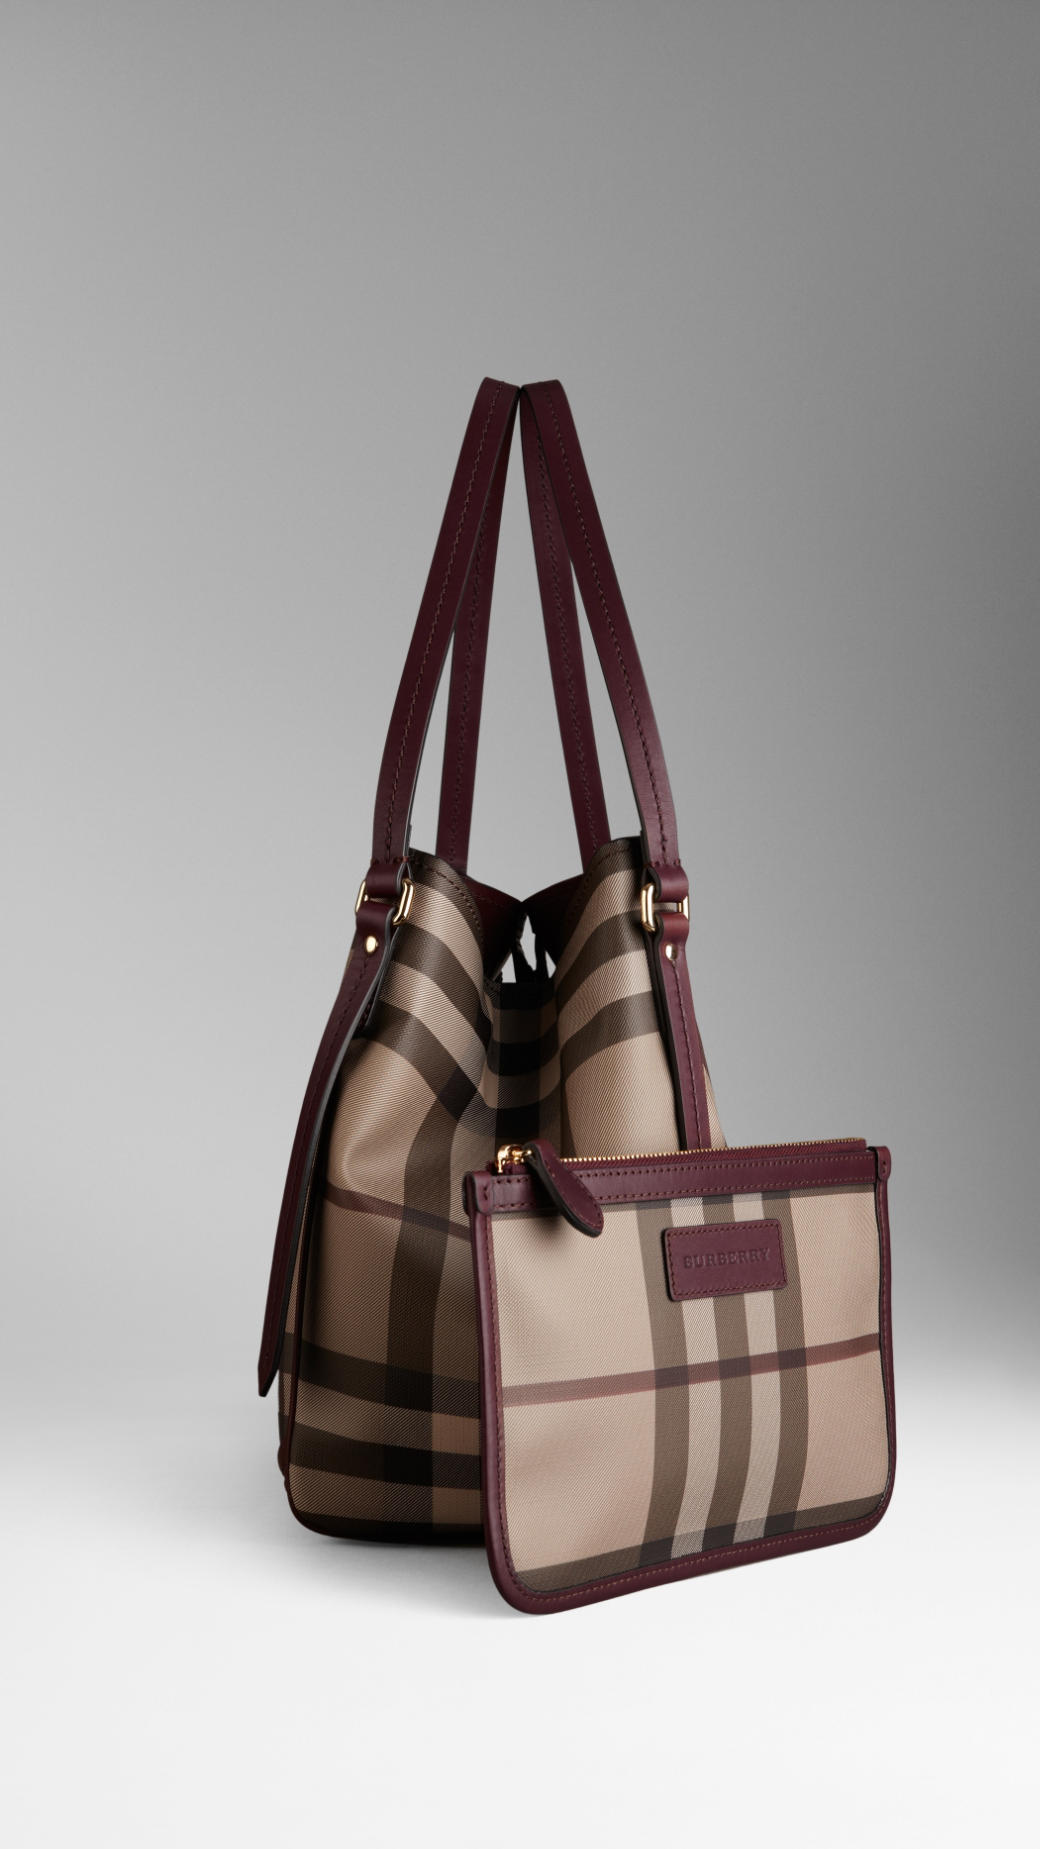 Lyst - Burberry Small Smoked Check Saddlestitch Tote Bag in Brown